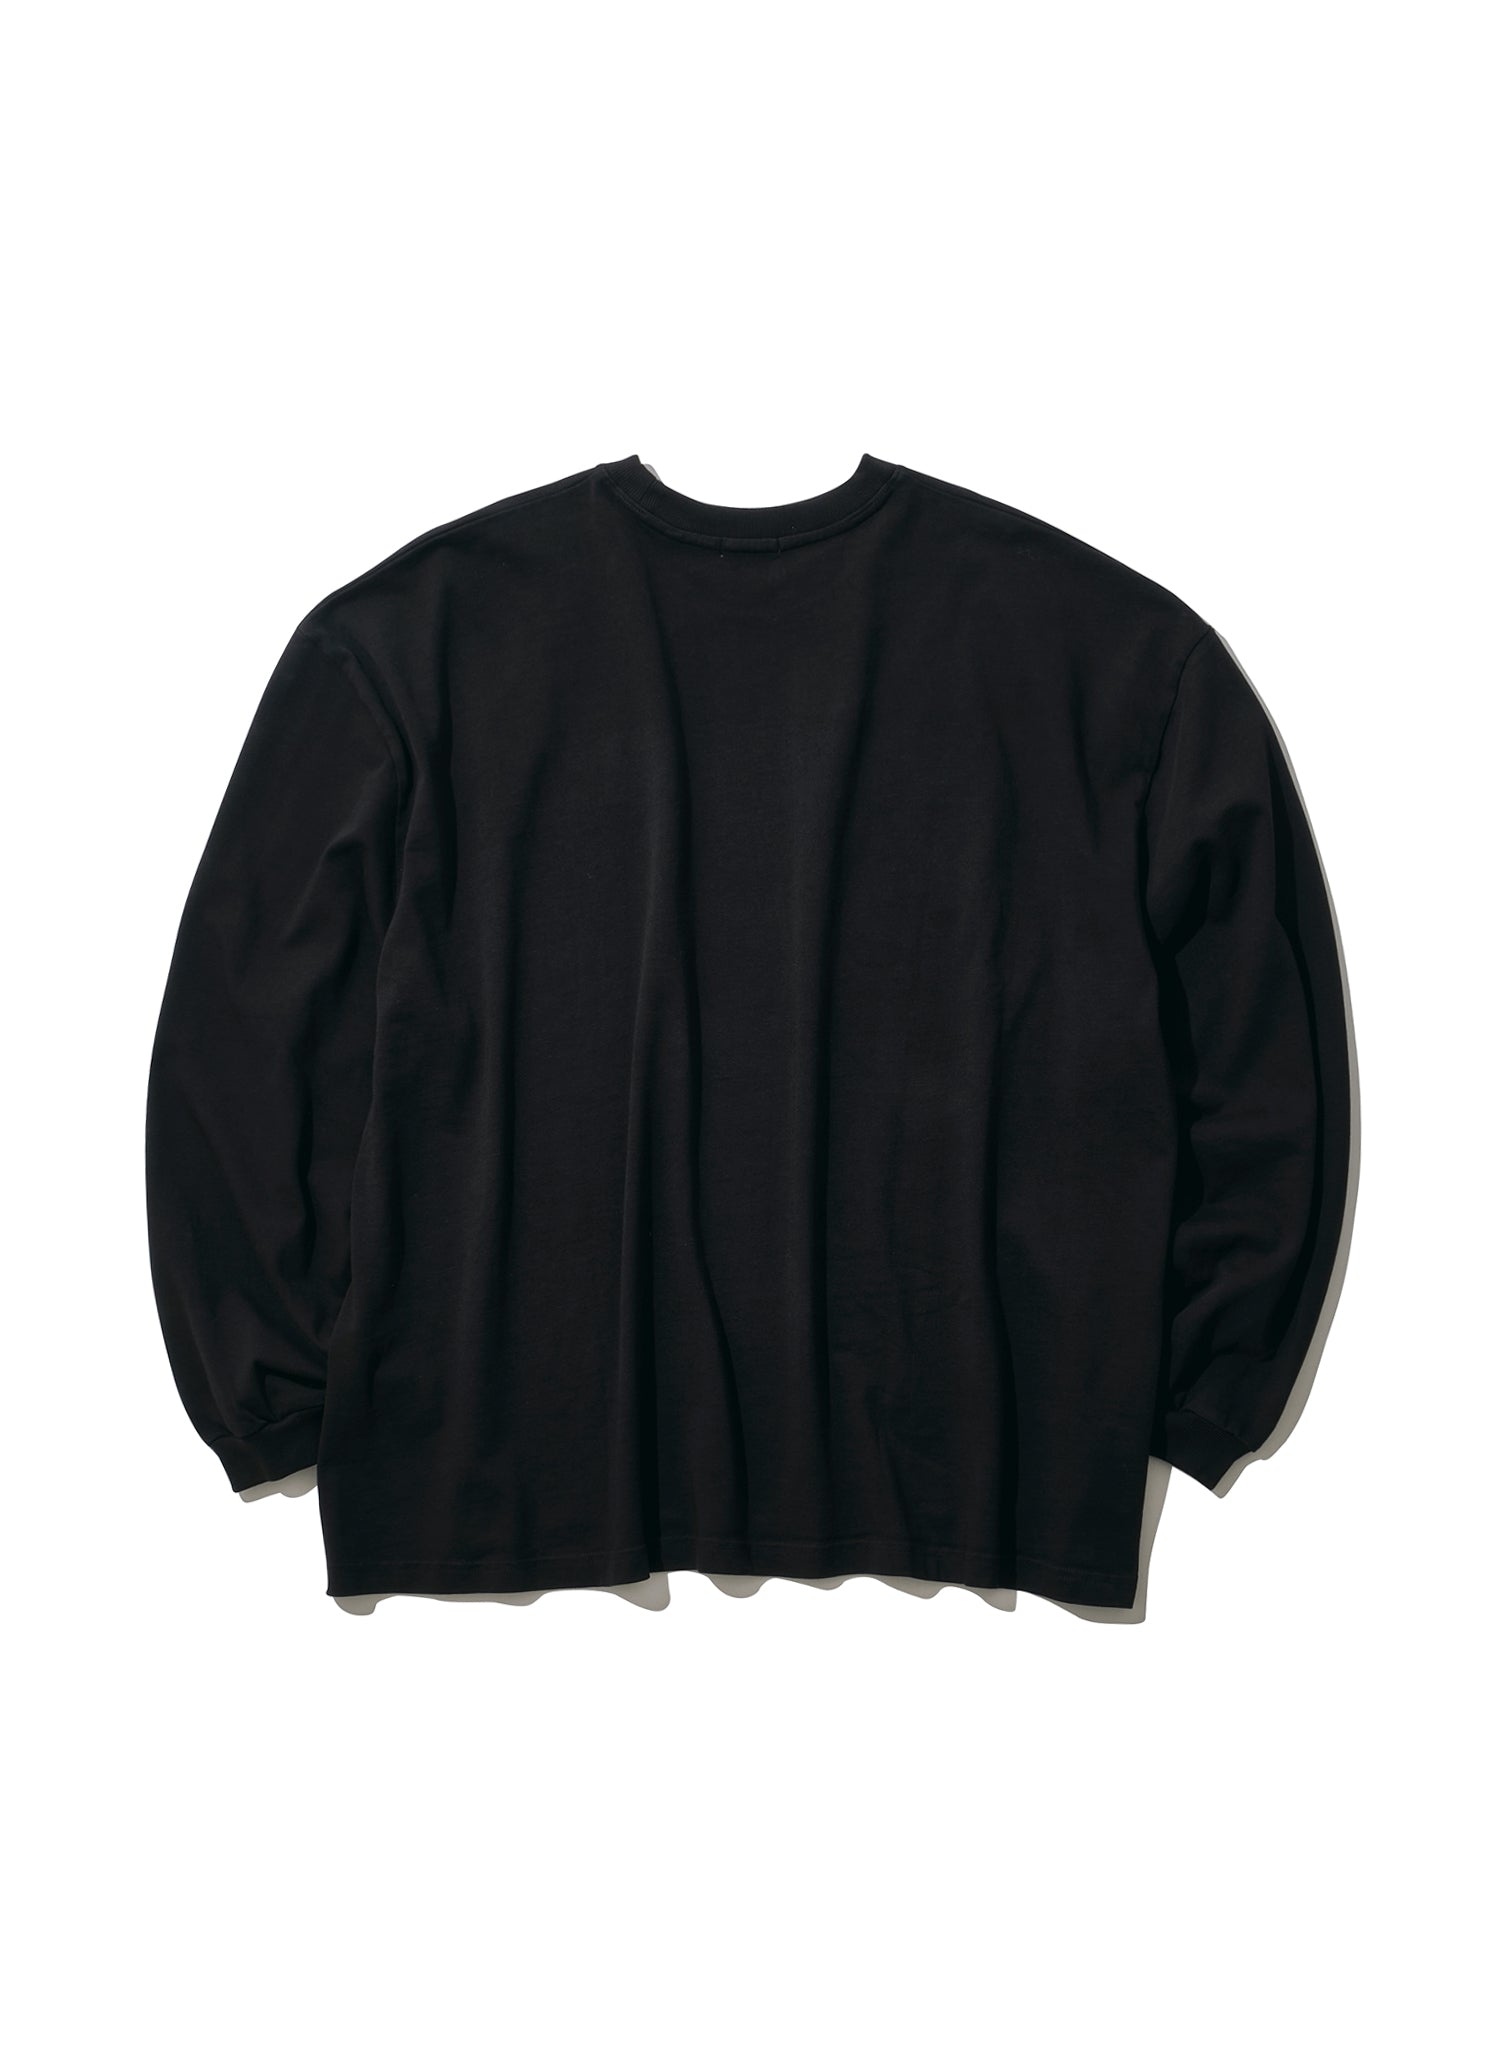 WILLY CHAVARRIA / ASCEND INTO SPIRIT LS BUFFALO T SOLID BLACK